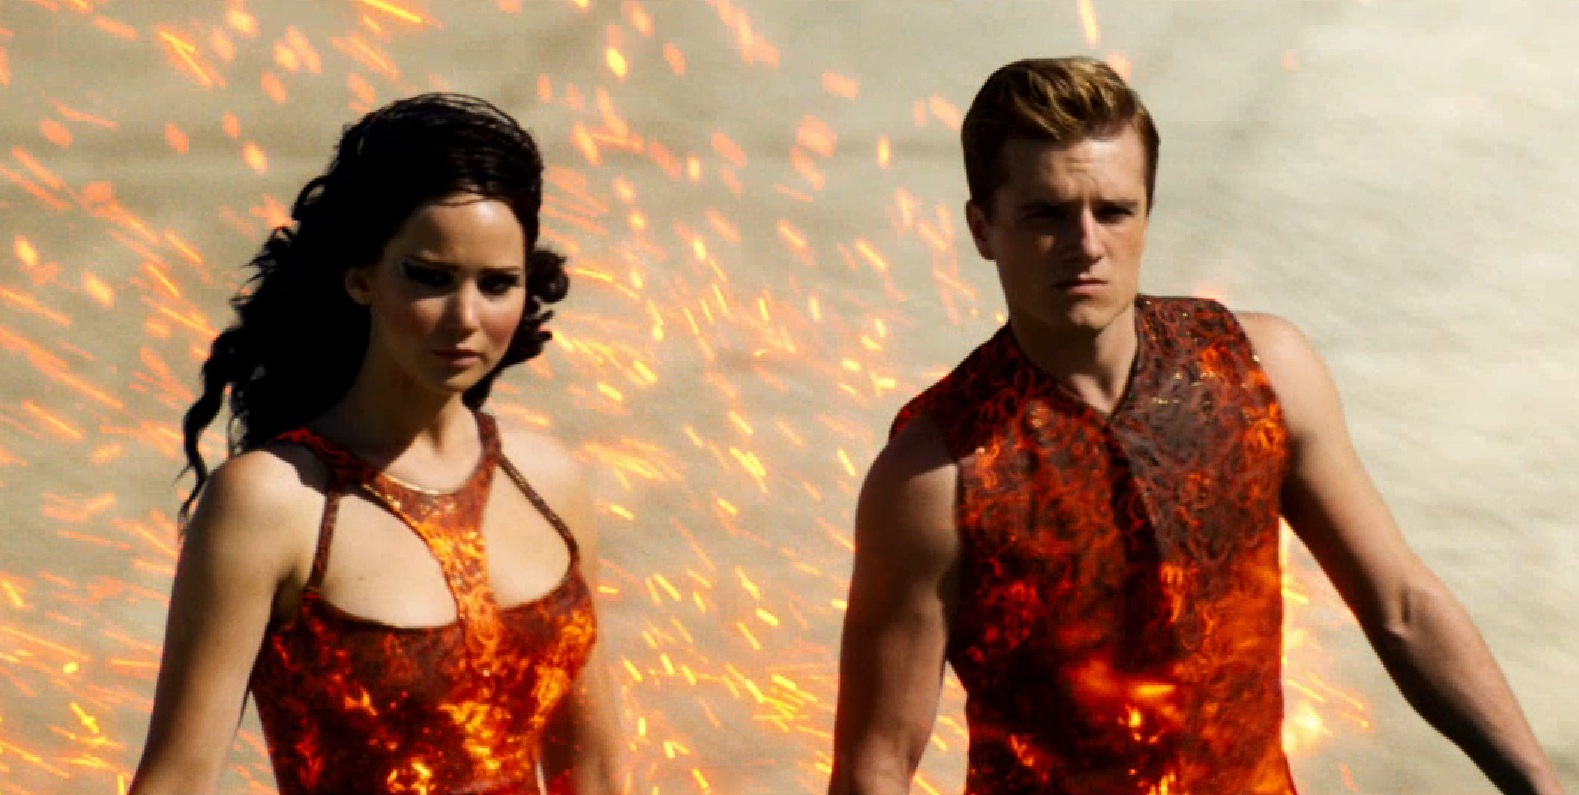 The Hunger Games: Catching Fire, starring Jennifer Lawrence, reviewed.